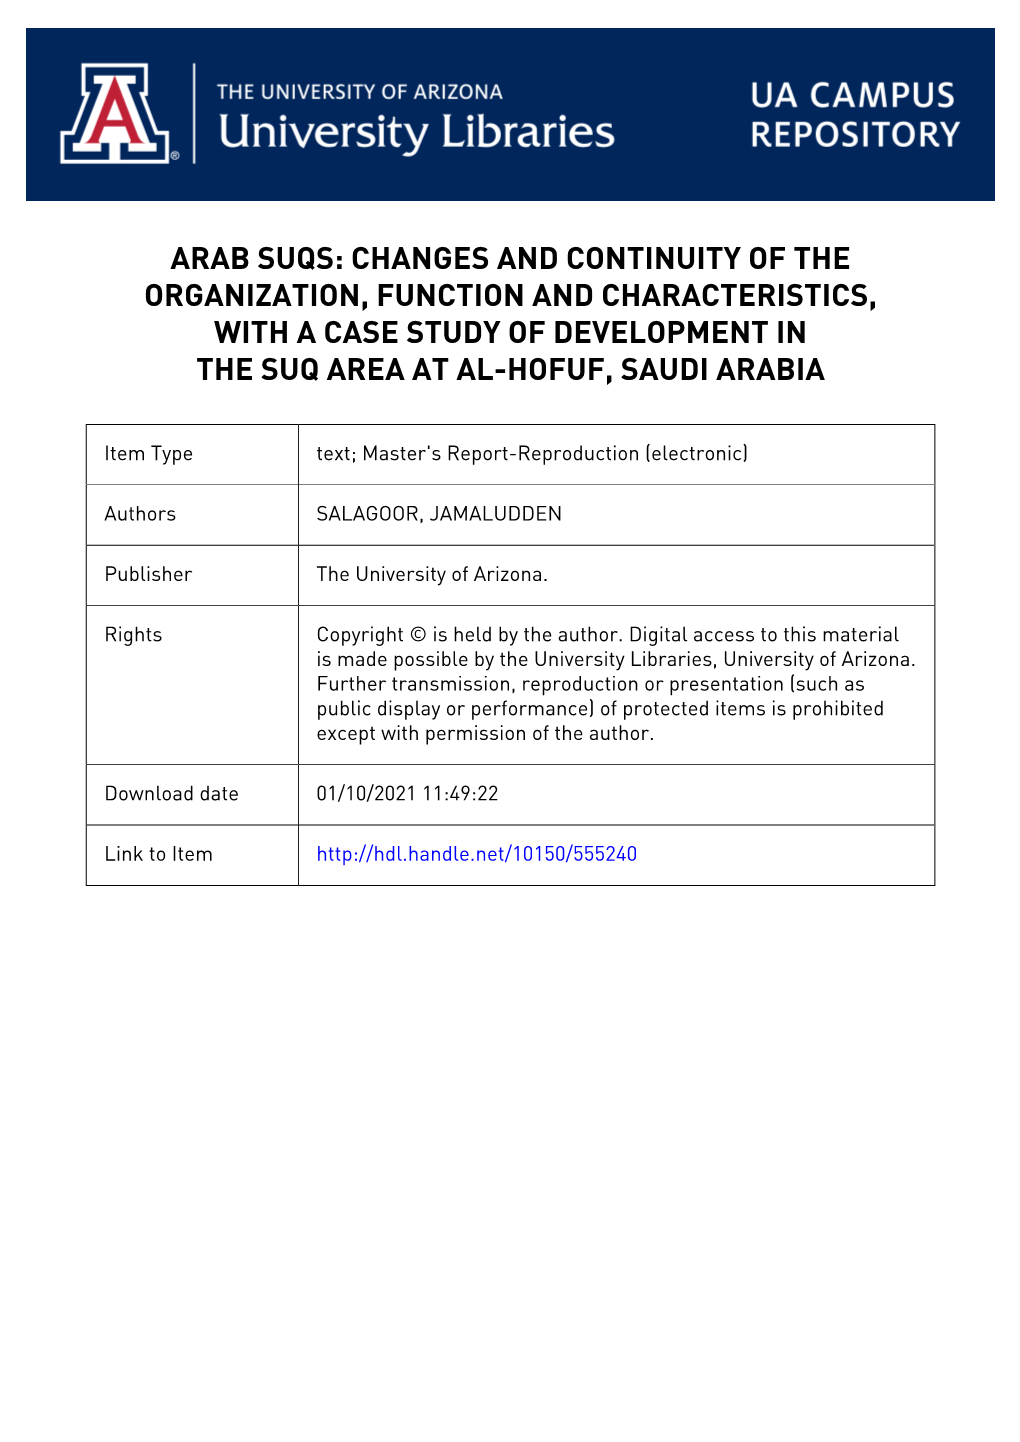 Suqs: Changes and Continuity of the Organization, Function and Characteristics, with a Case Study of Development in the Suq Area at Al-Hofuf, Saudi Arabia